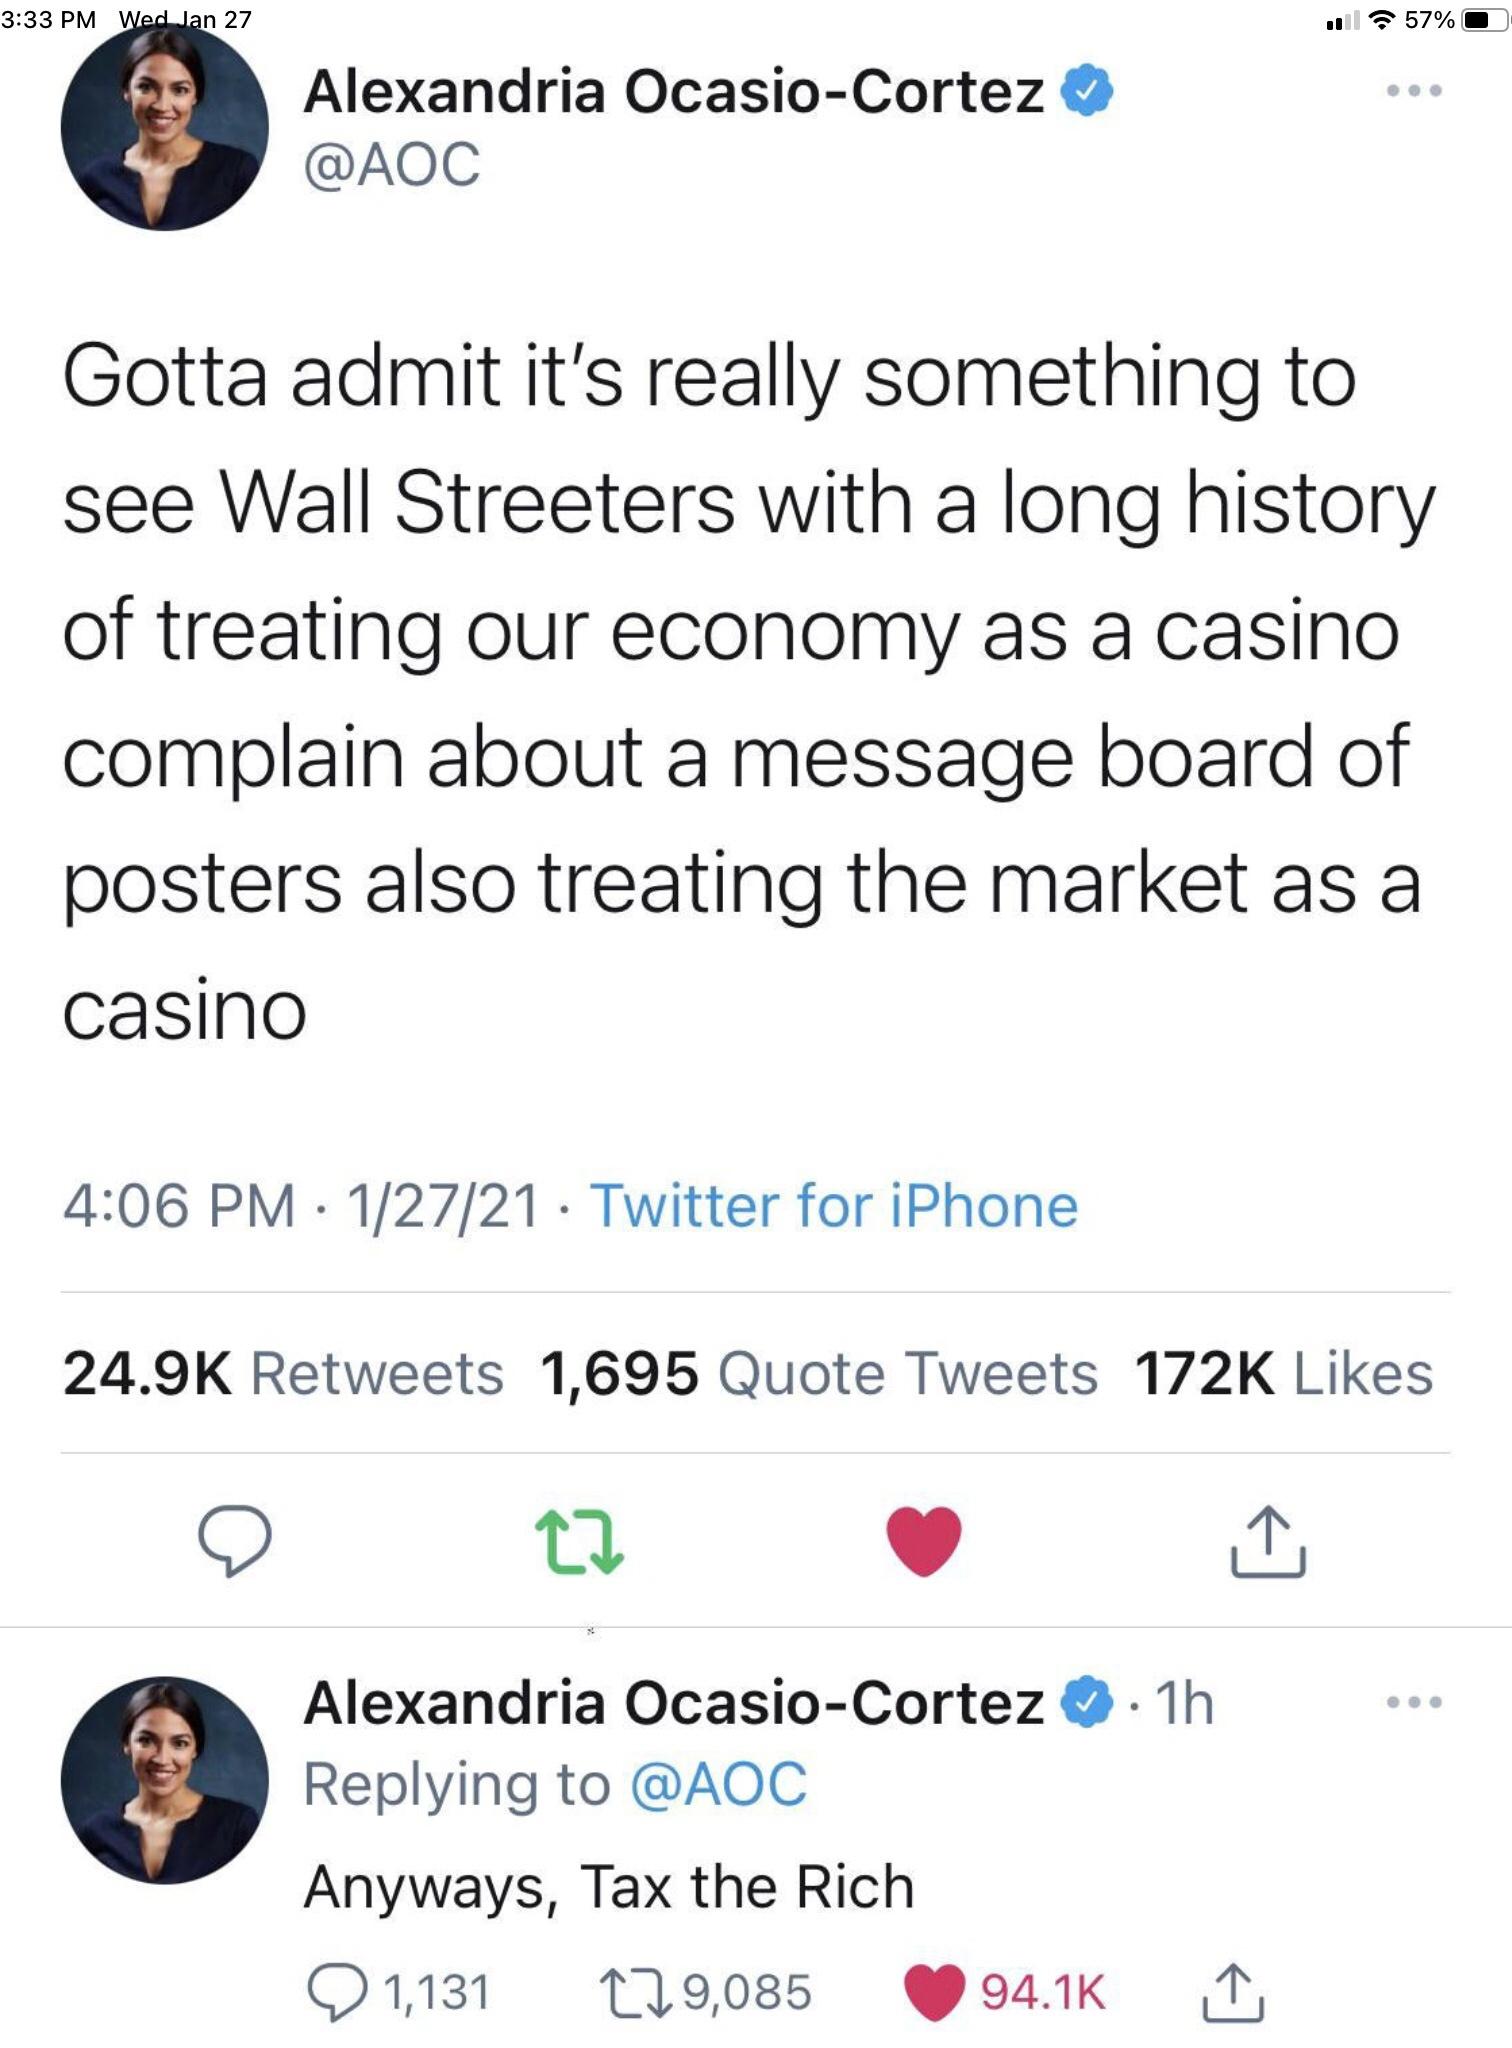 screenshot - Wed Jan 27 57% Alexandria OcasioCortez Gotta admit it's really something to see Wall Streeters with a long history of treating our economy as a casino complain about a message board of posters also treating the market as a casino 12721 Twitte